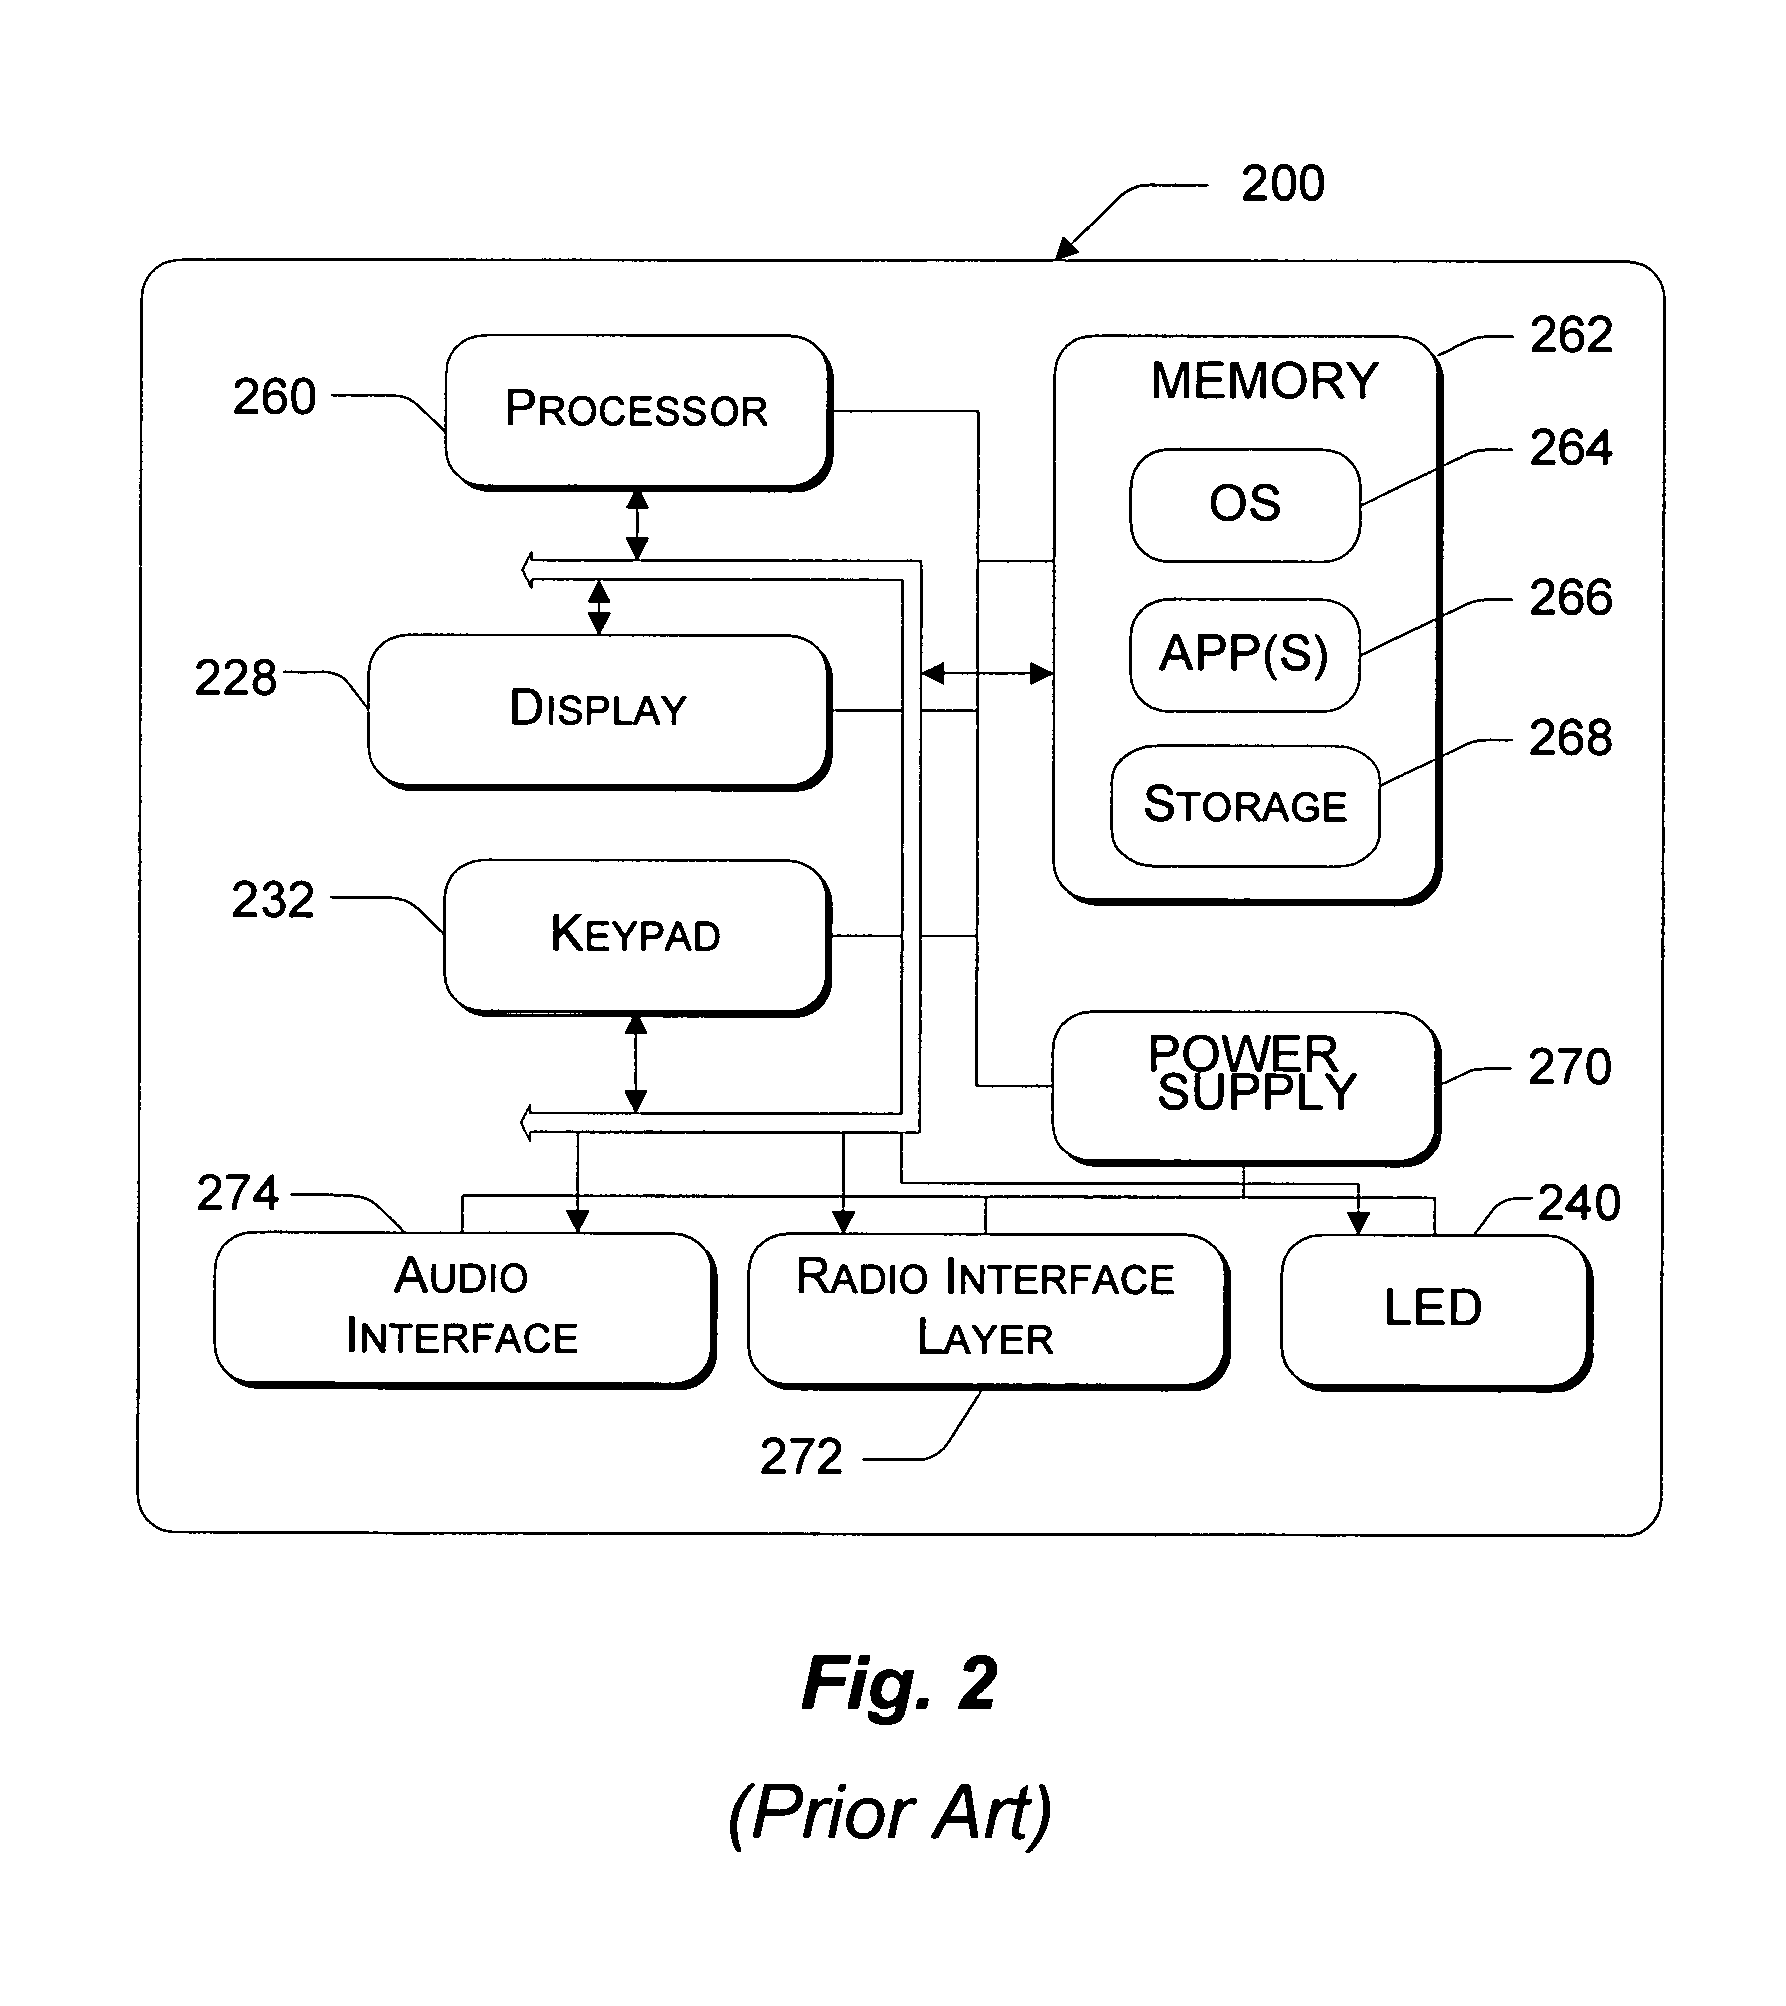 System and method for resolving conflicts detected during a synchronization session